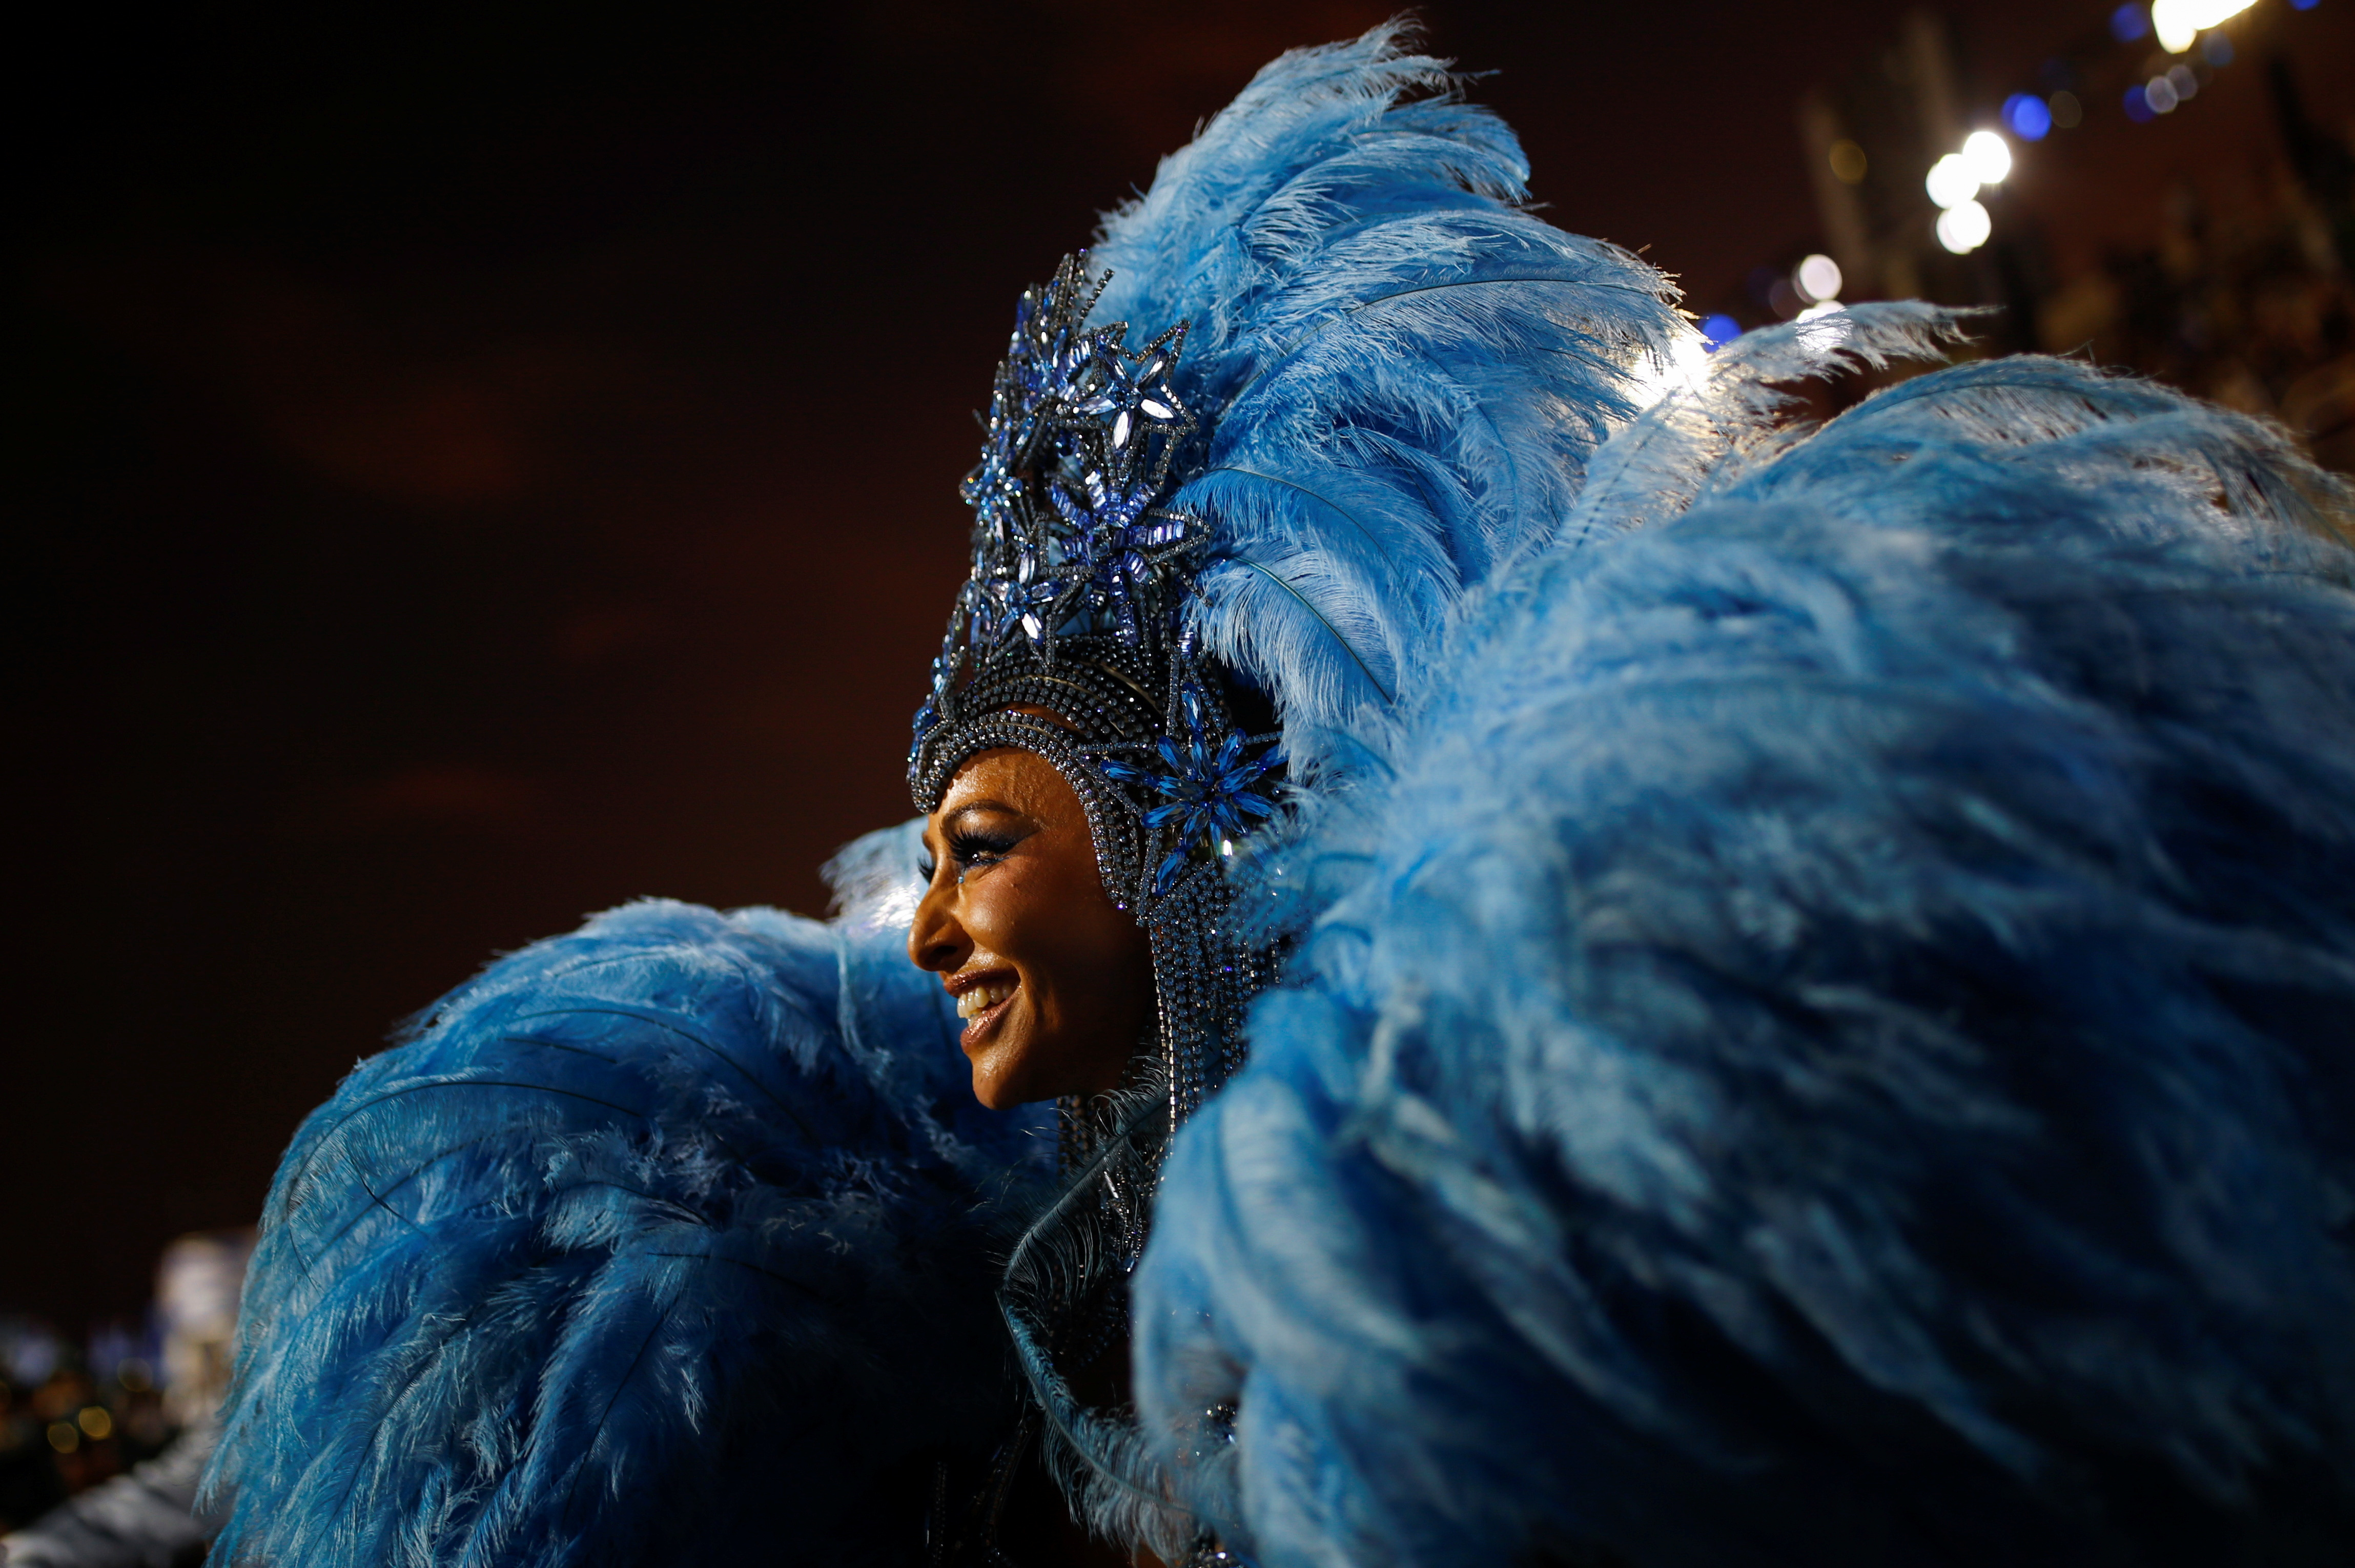 Second night of the Carnival parade at the Sambadrome in Rio de Janeiro